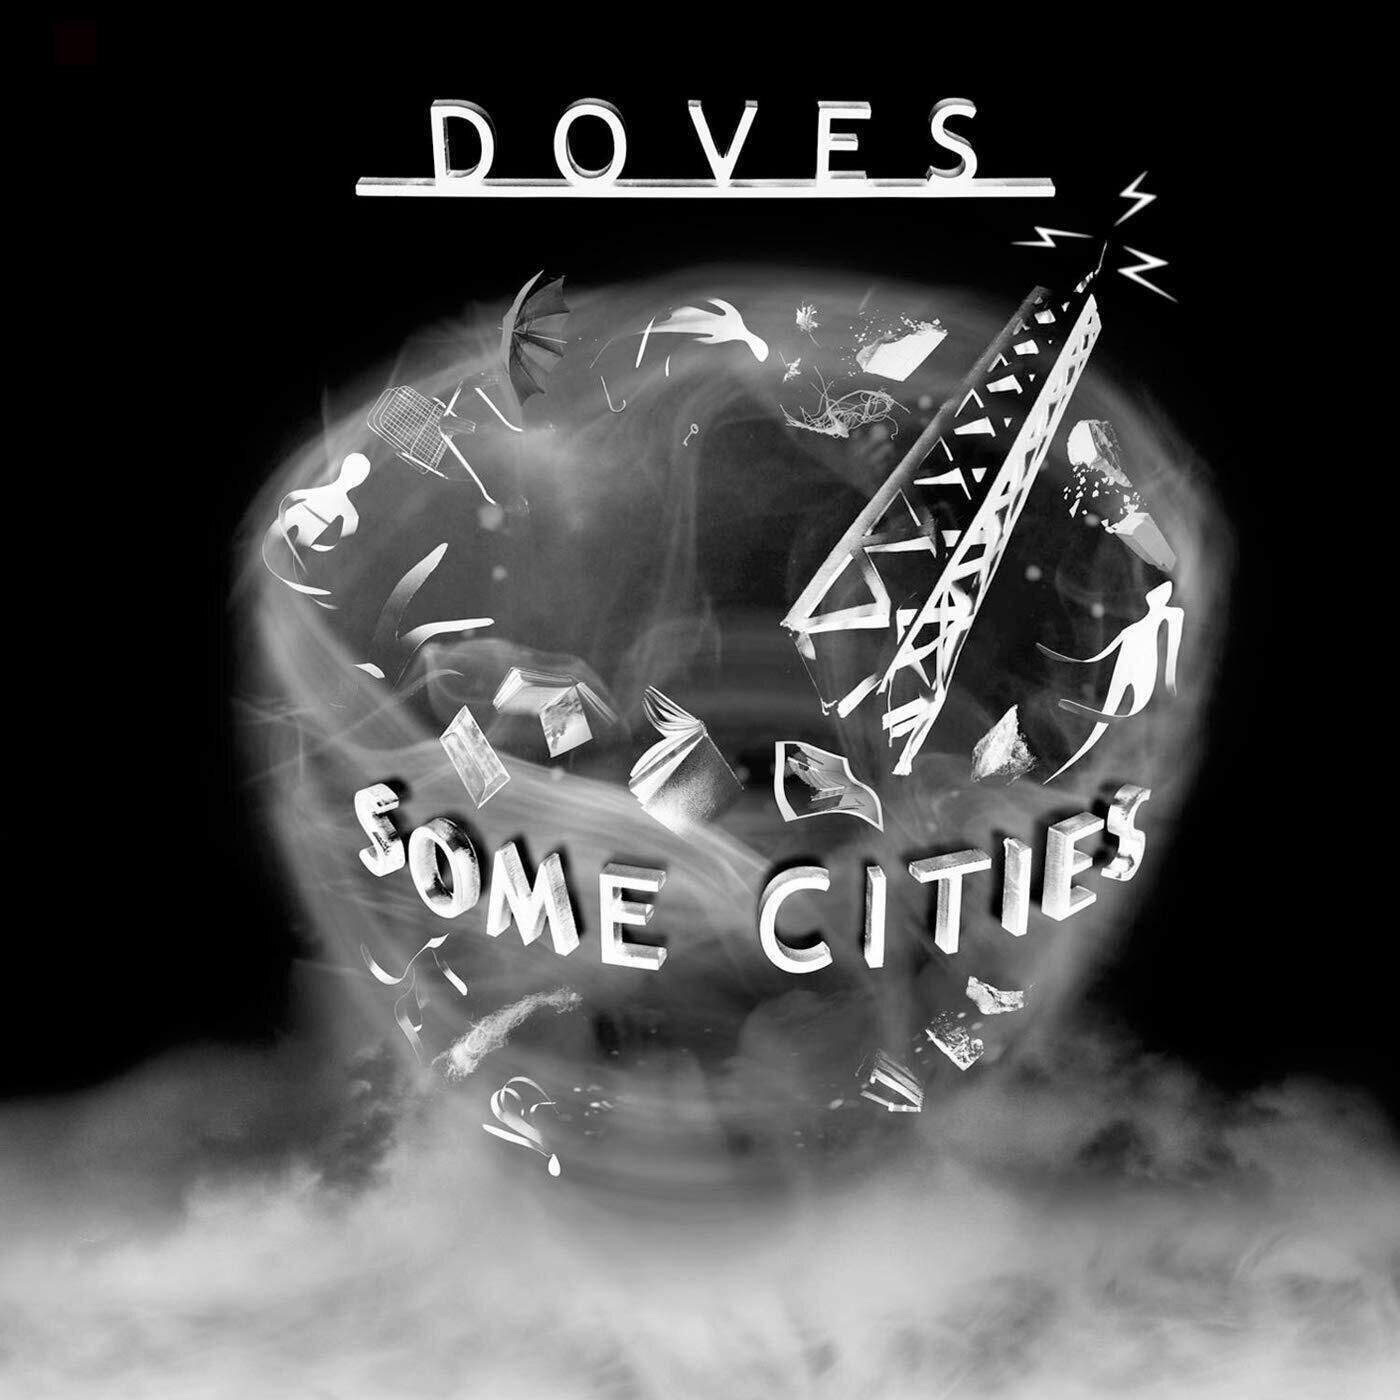 LP Doves - Some Cities (White Coloured) (Limited Edition) (2 LP)